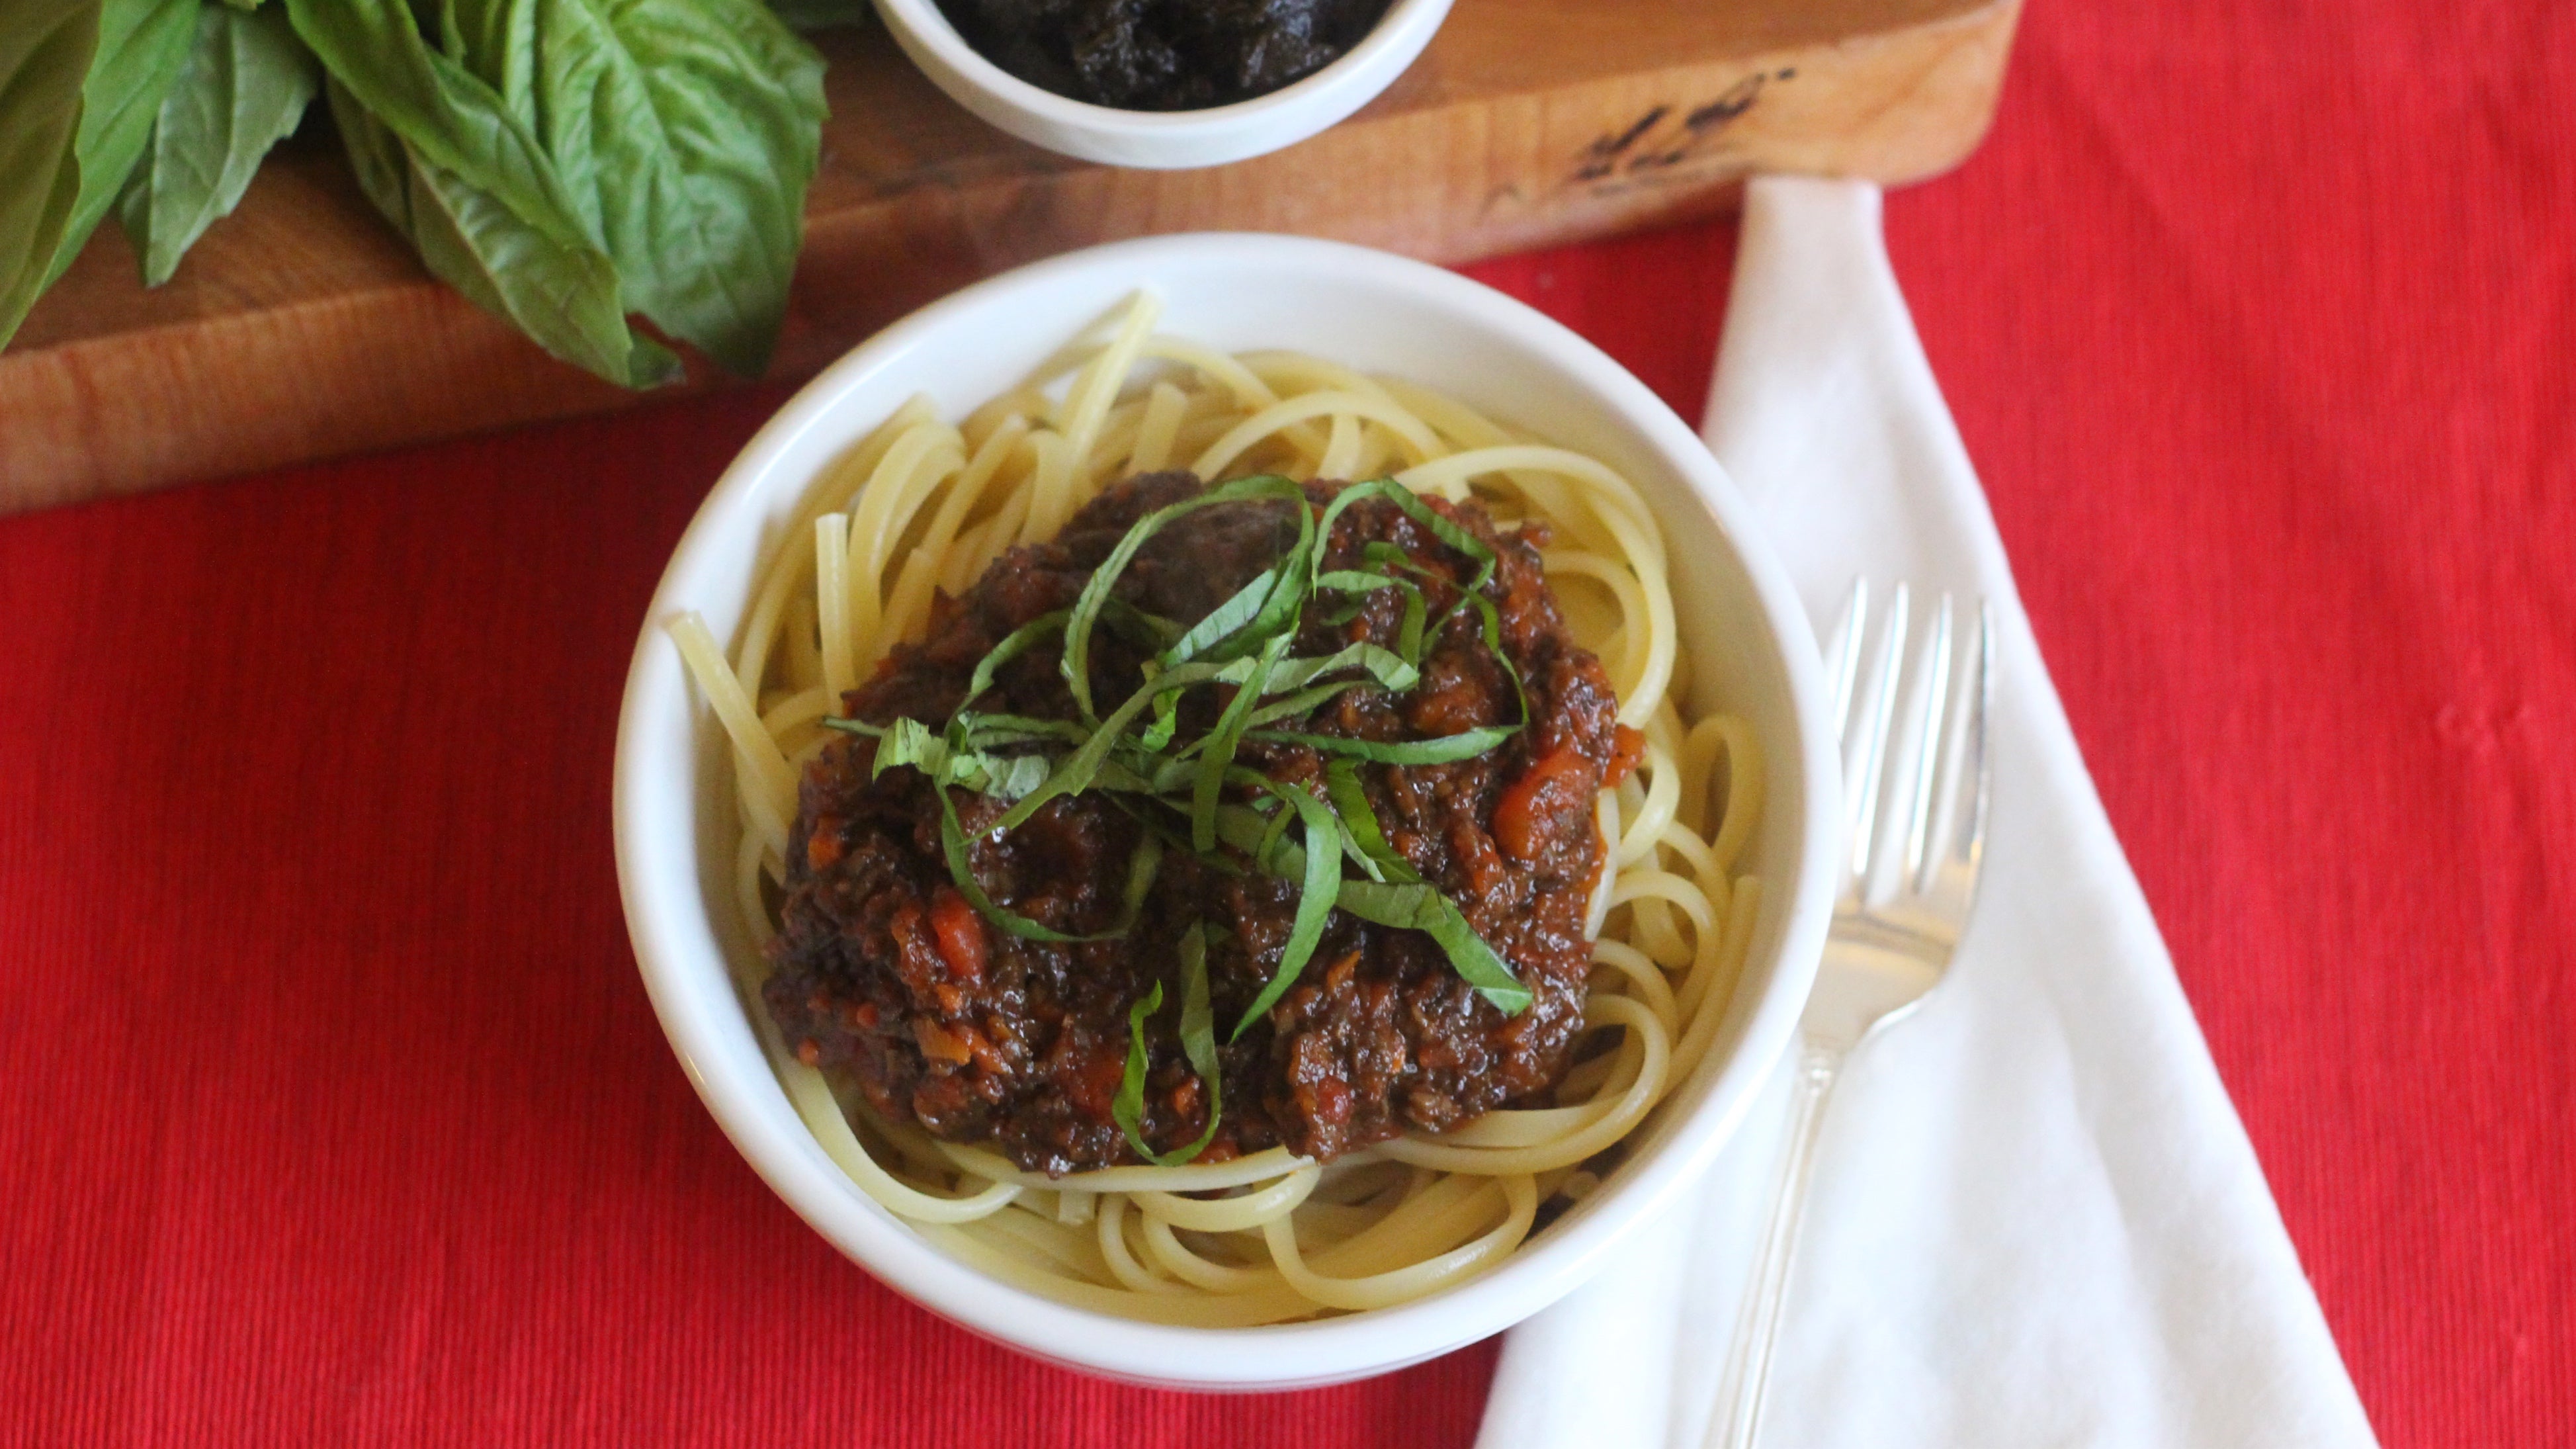 How To Make The Best Vegan Bolognese